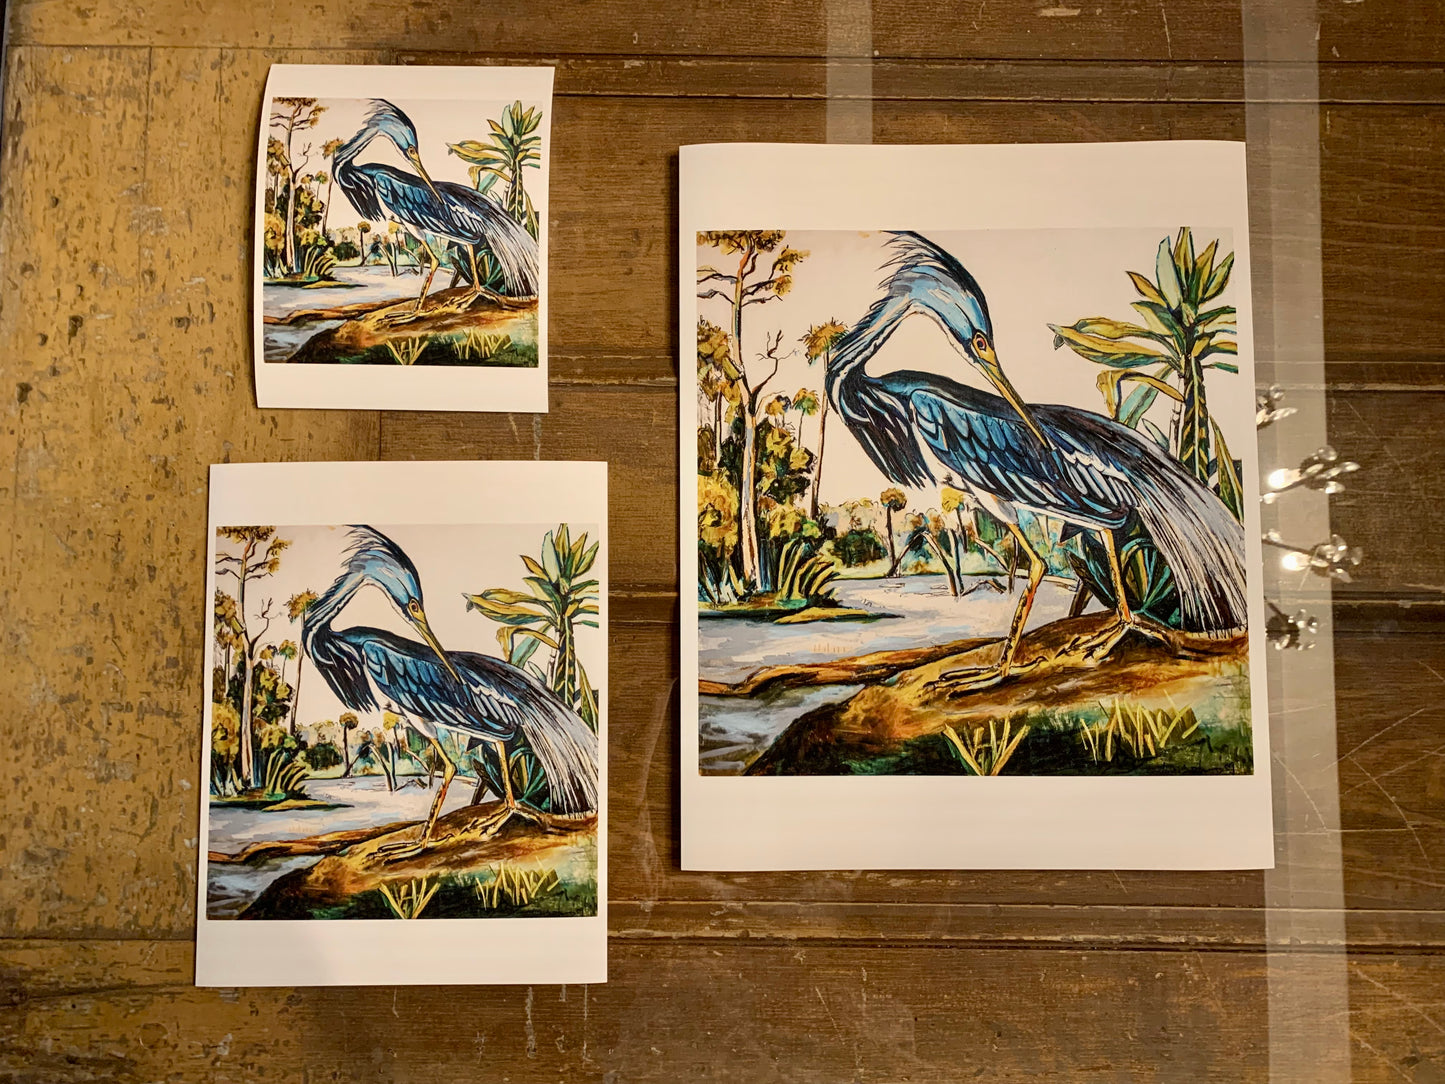 Blue Heron Reproduction on 100% cotton paper